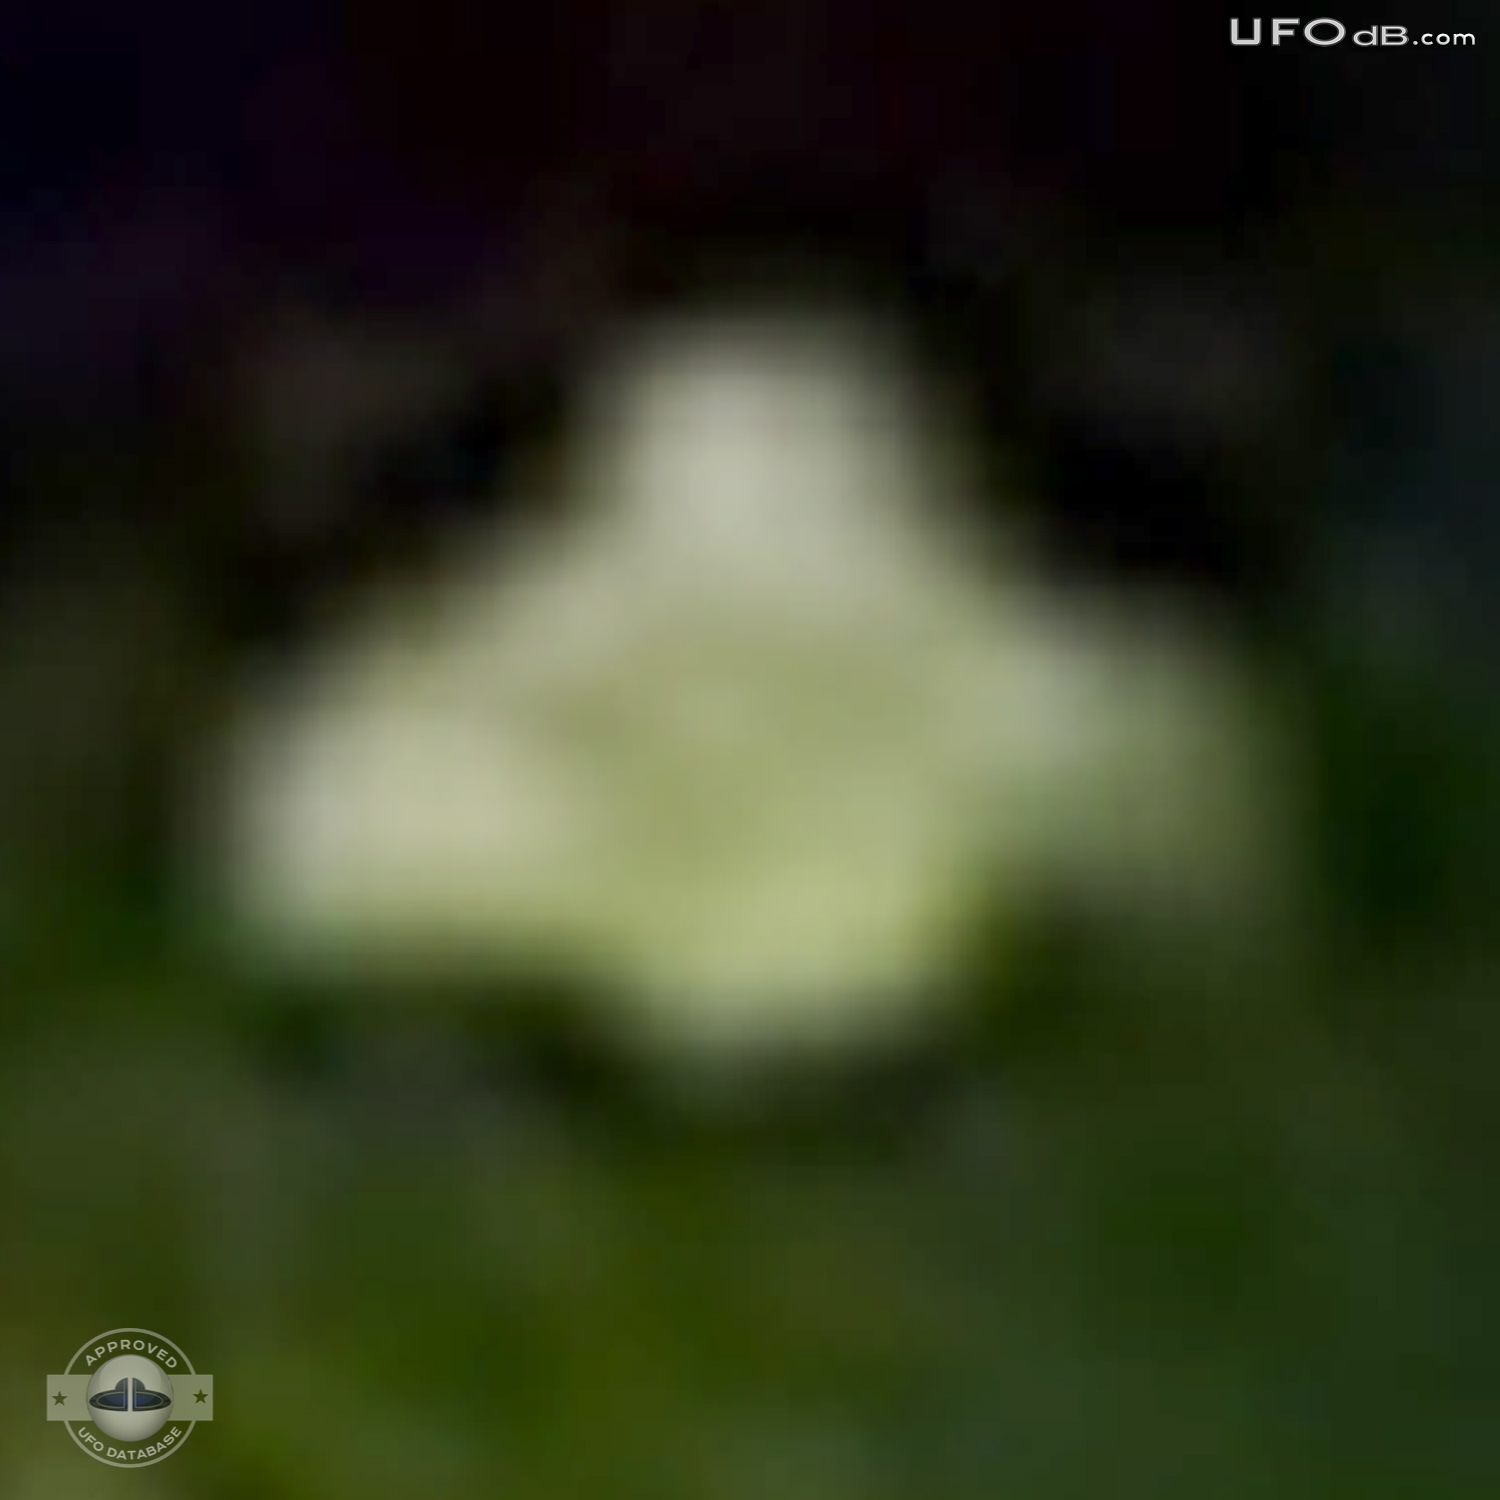 Australian Gold prospector capture UFO on picture in New South Wales UFO Picture #354-6